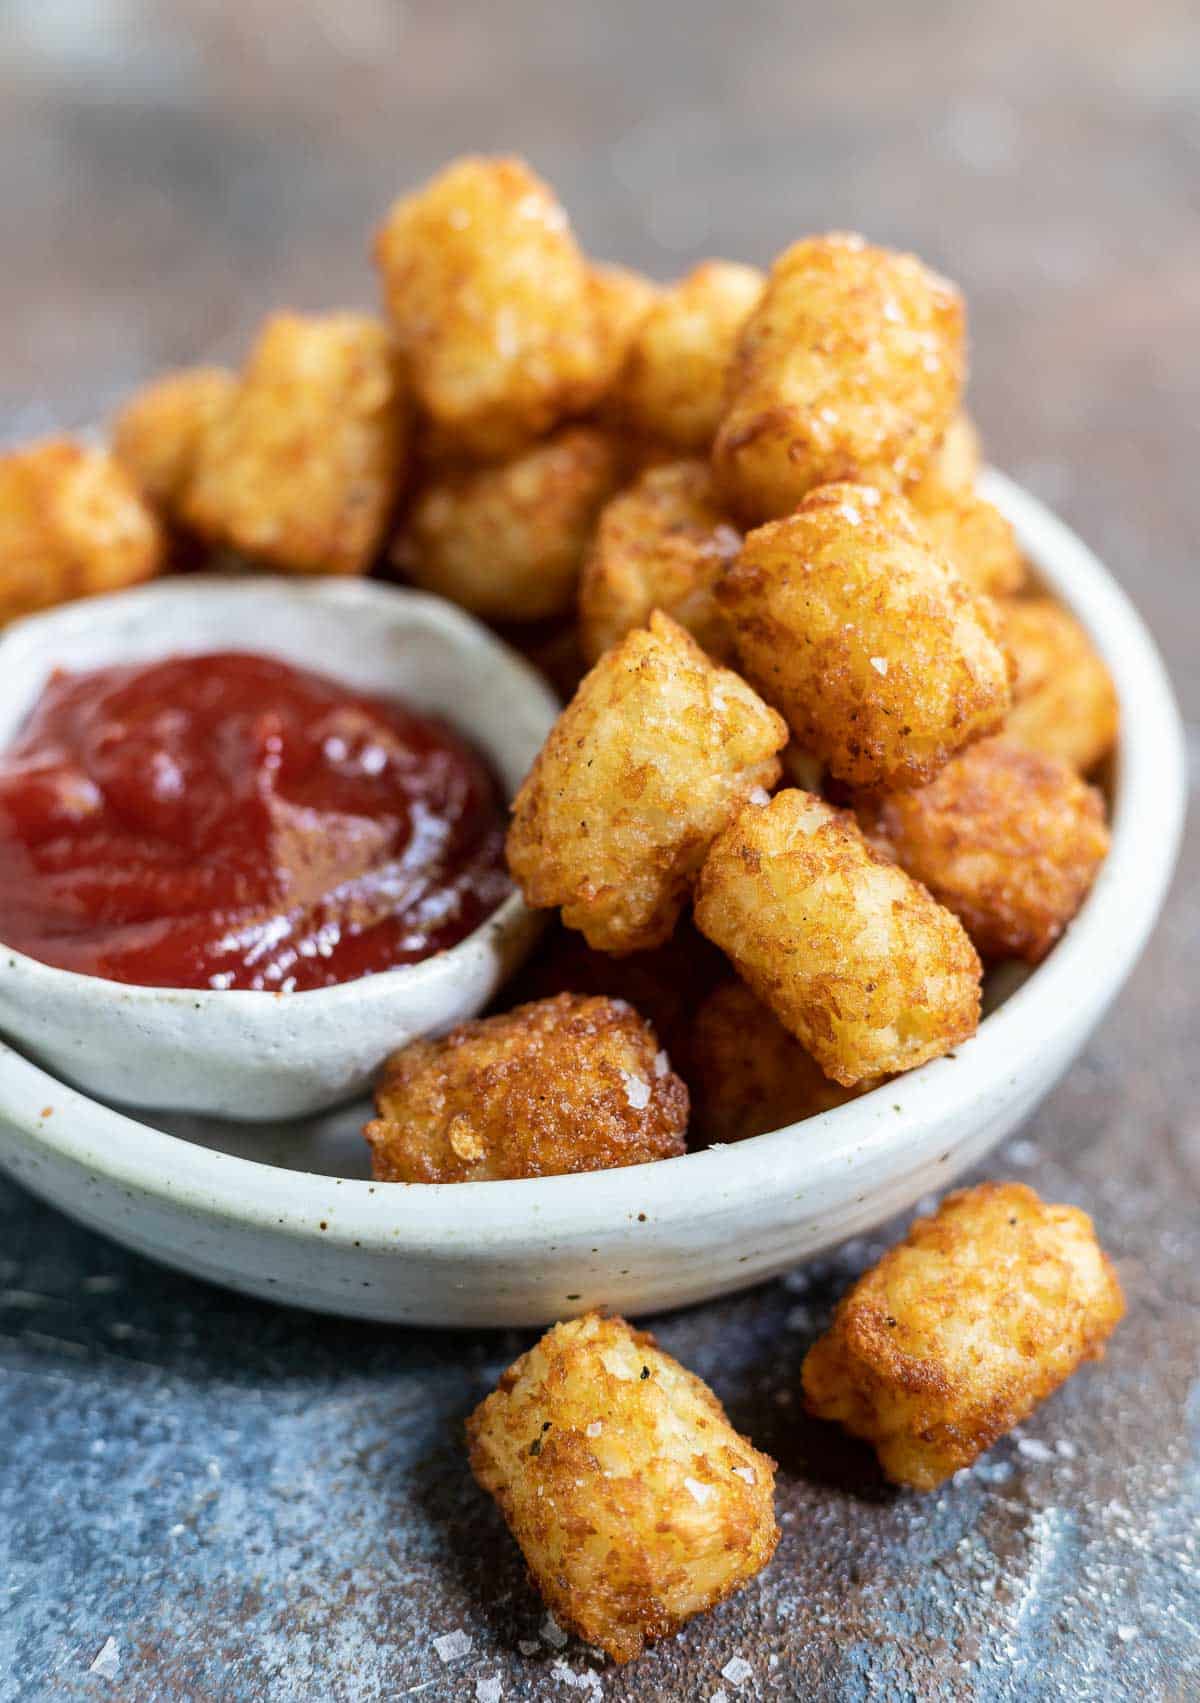 Frozen tater tots in the air fryer